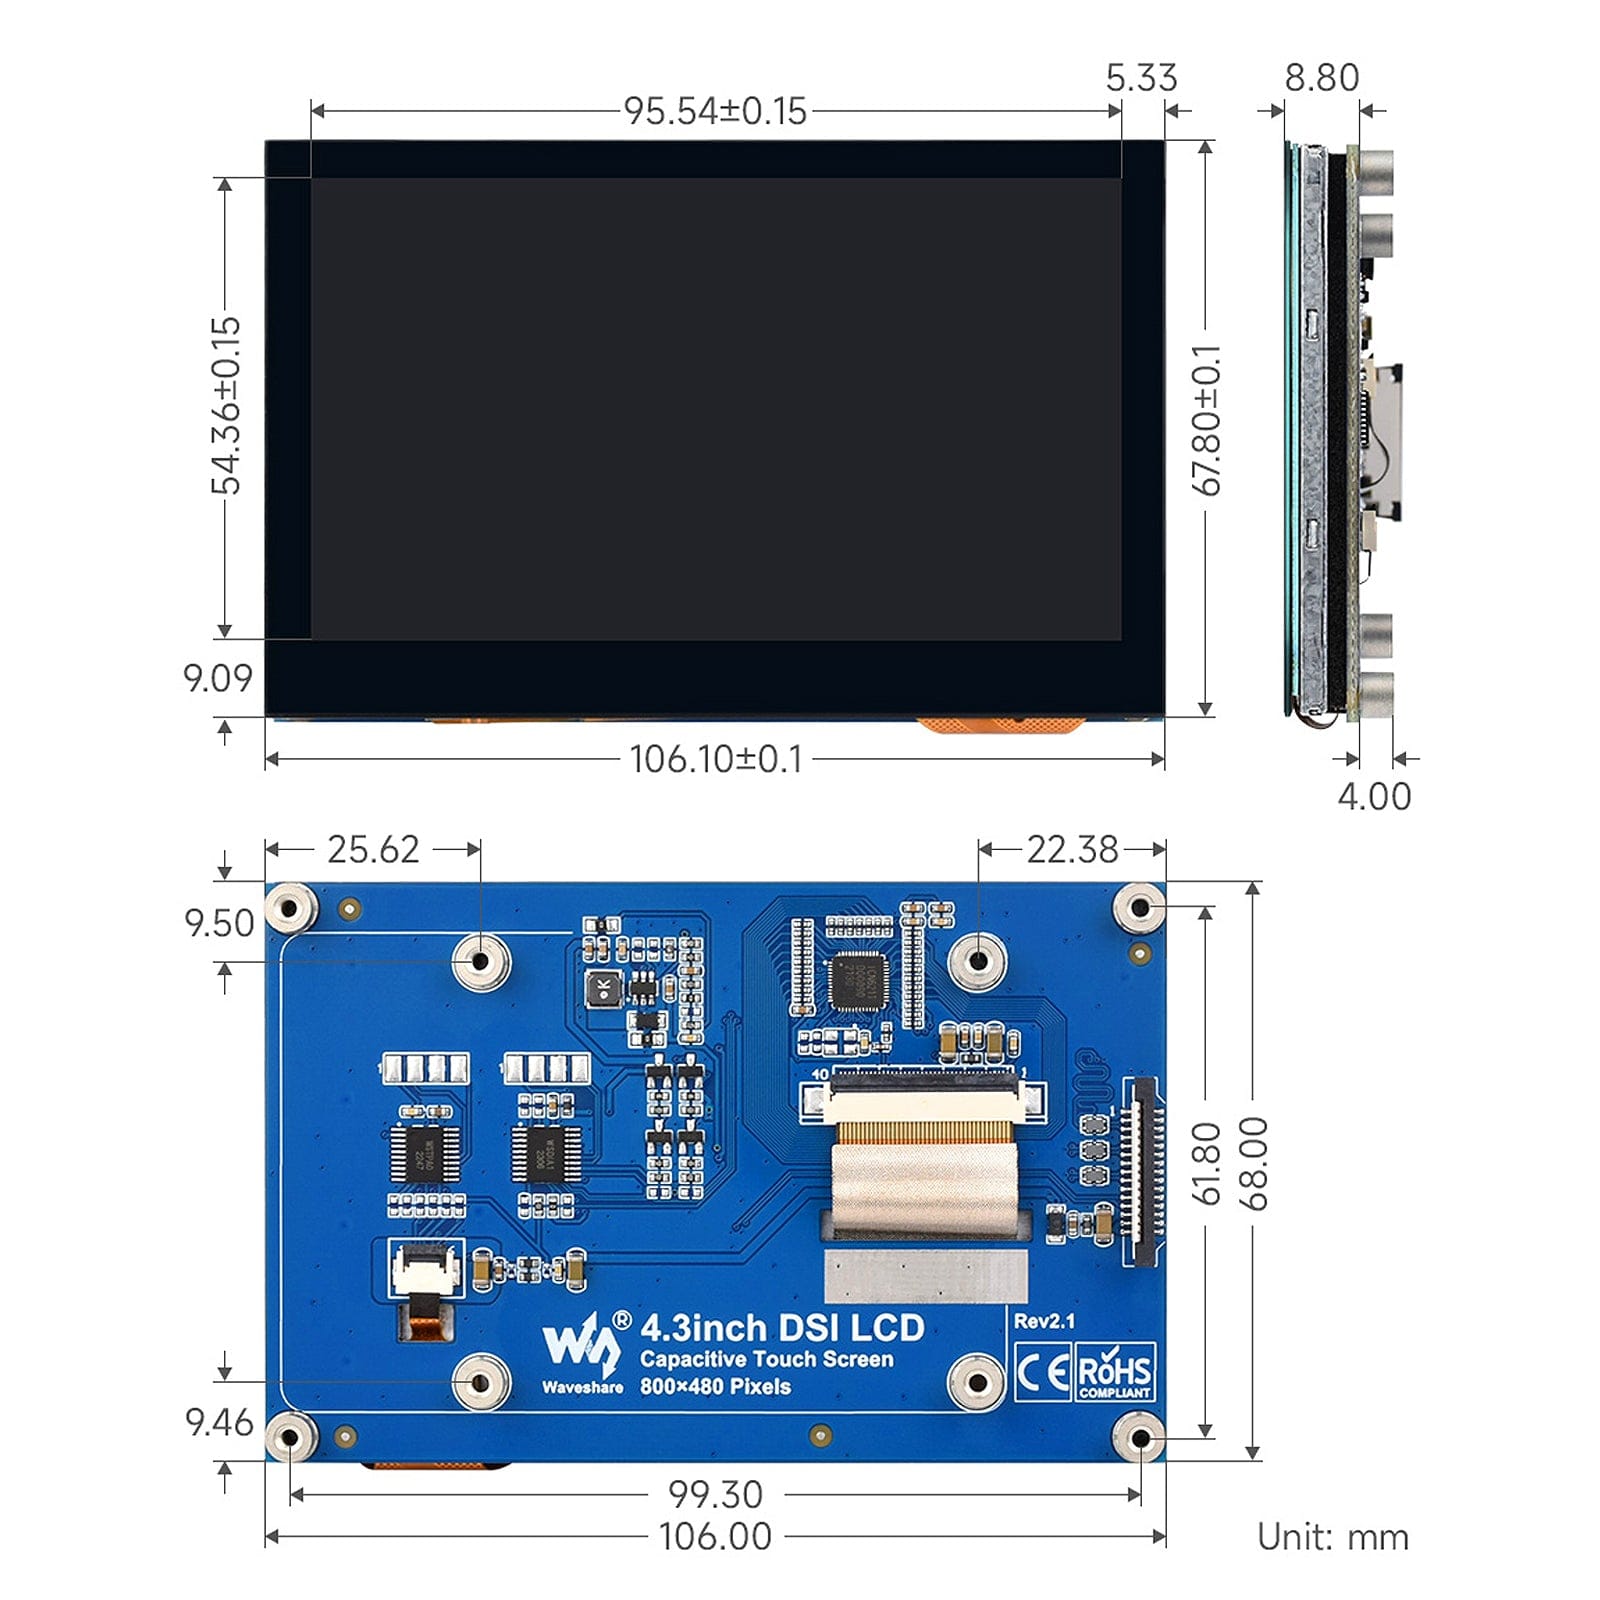 4.3" DSI QLED Capacitive Touch Display for Raspberry Pi (800x480) - The Pi Hut